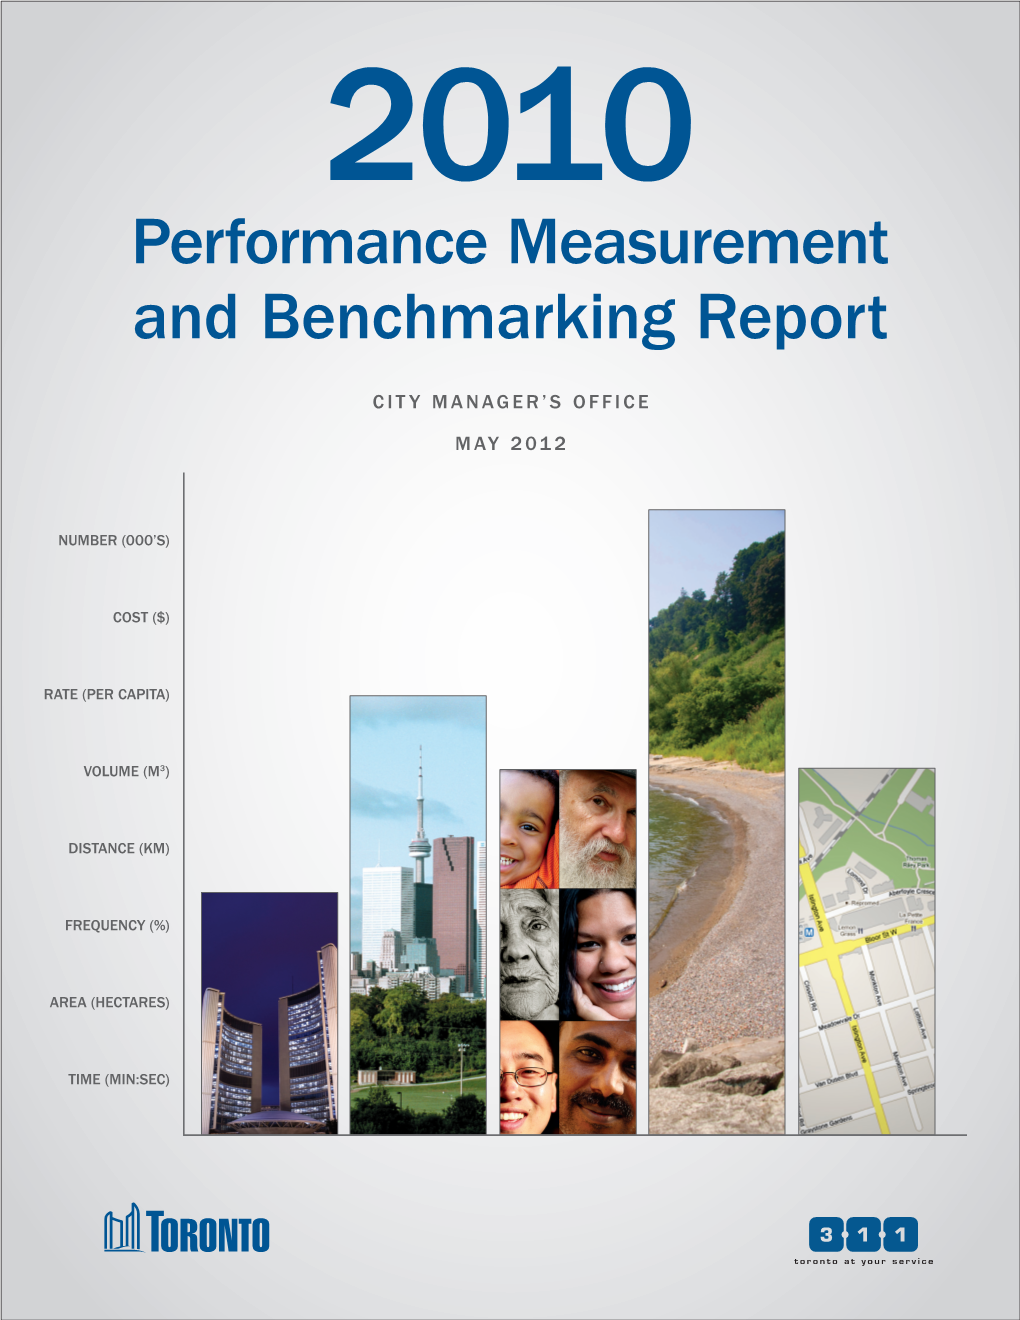 Performance Measurement and Benchmarking Report